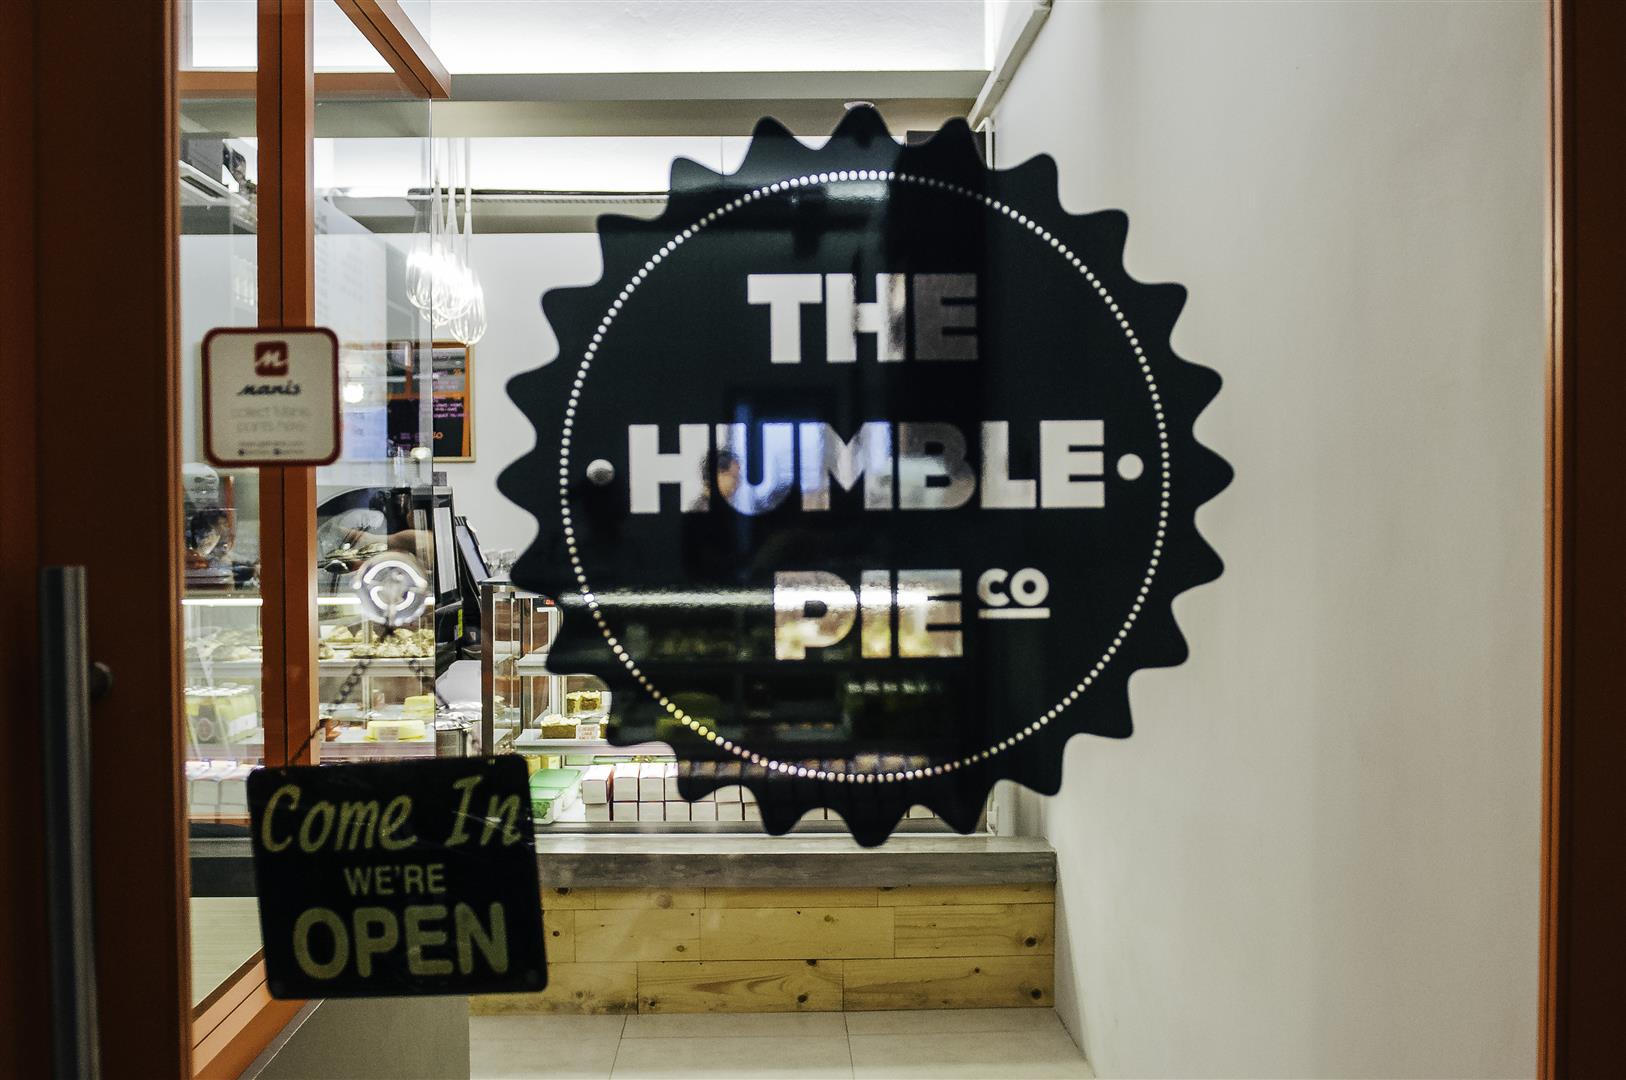 source: The Humble Pie